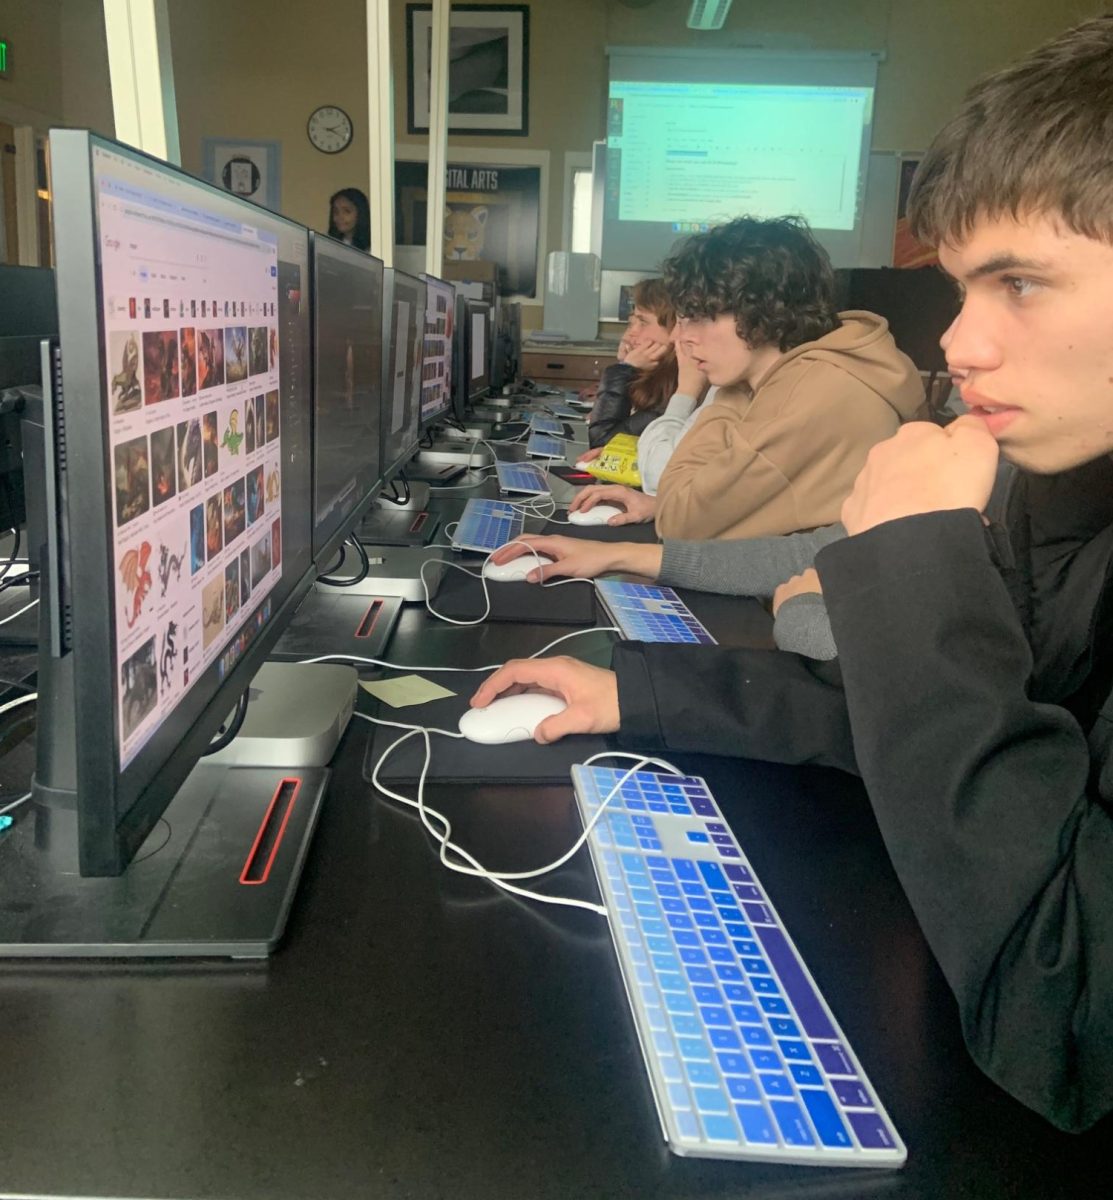 Kai Mcelderry ‘25 works on a piece in Kennetha Miller’s Photoshop and Digital Design class Jan. 11. Students were required to create a piece in Photoshop using already-created art and enhance it to be evaluated for their abilities. “I think it’s a pretty cool class,” Mcelderry said.